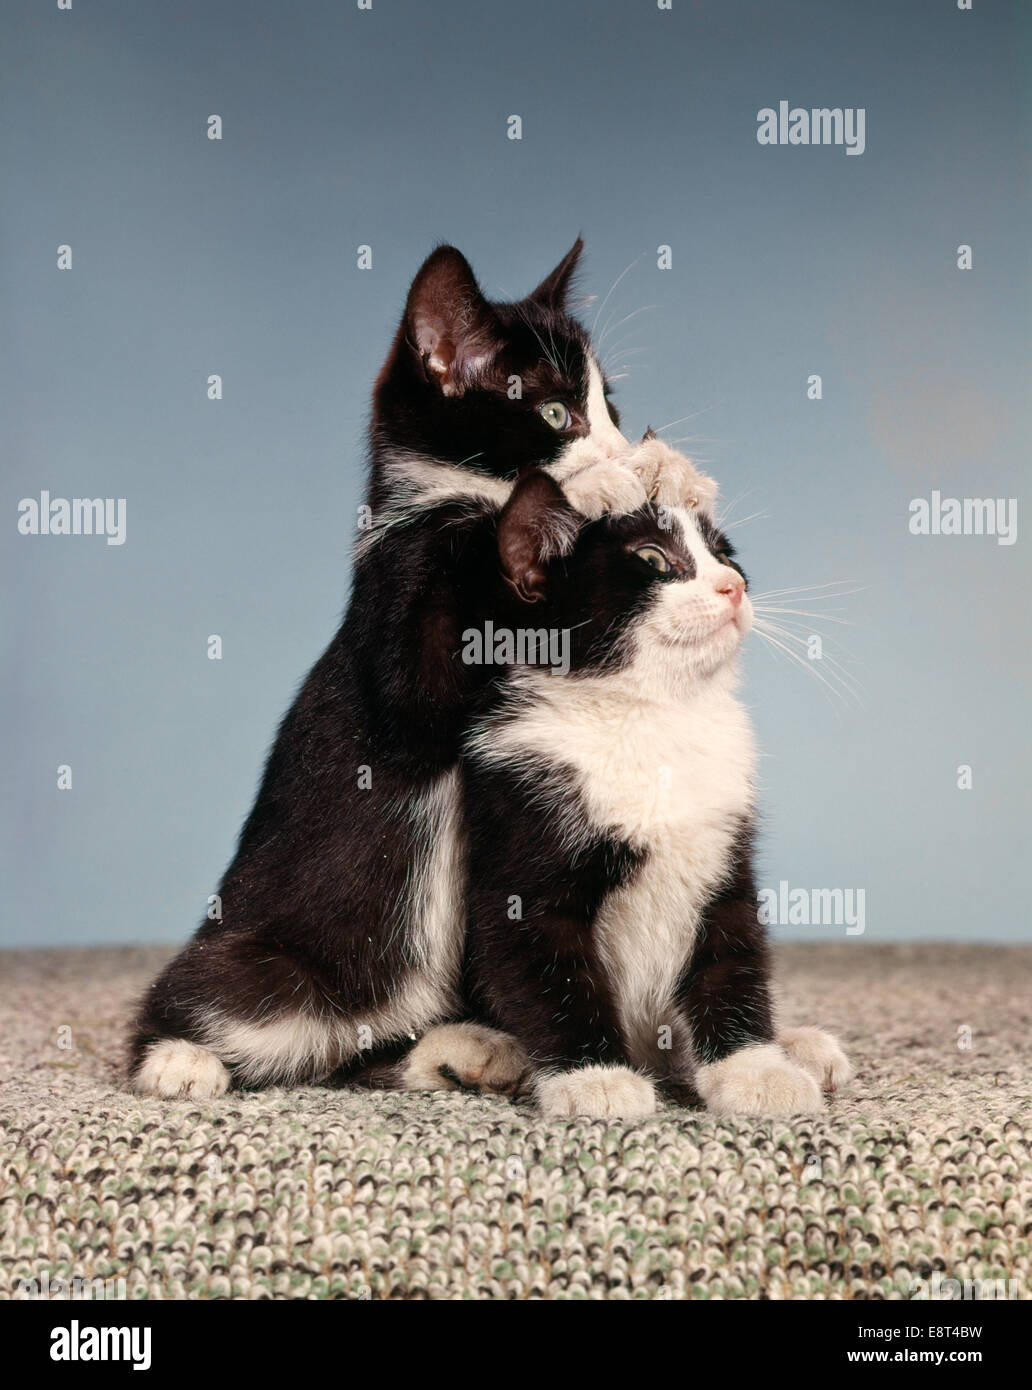 1960s TWO BLACK AND WHITE TUXEDO CAT KITTENS IN FUNNY POSE Stock Photo